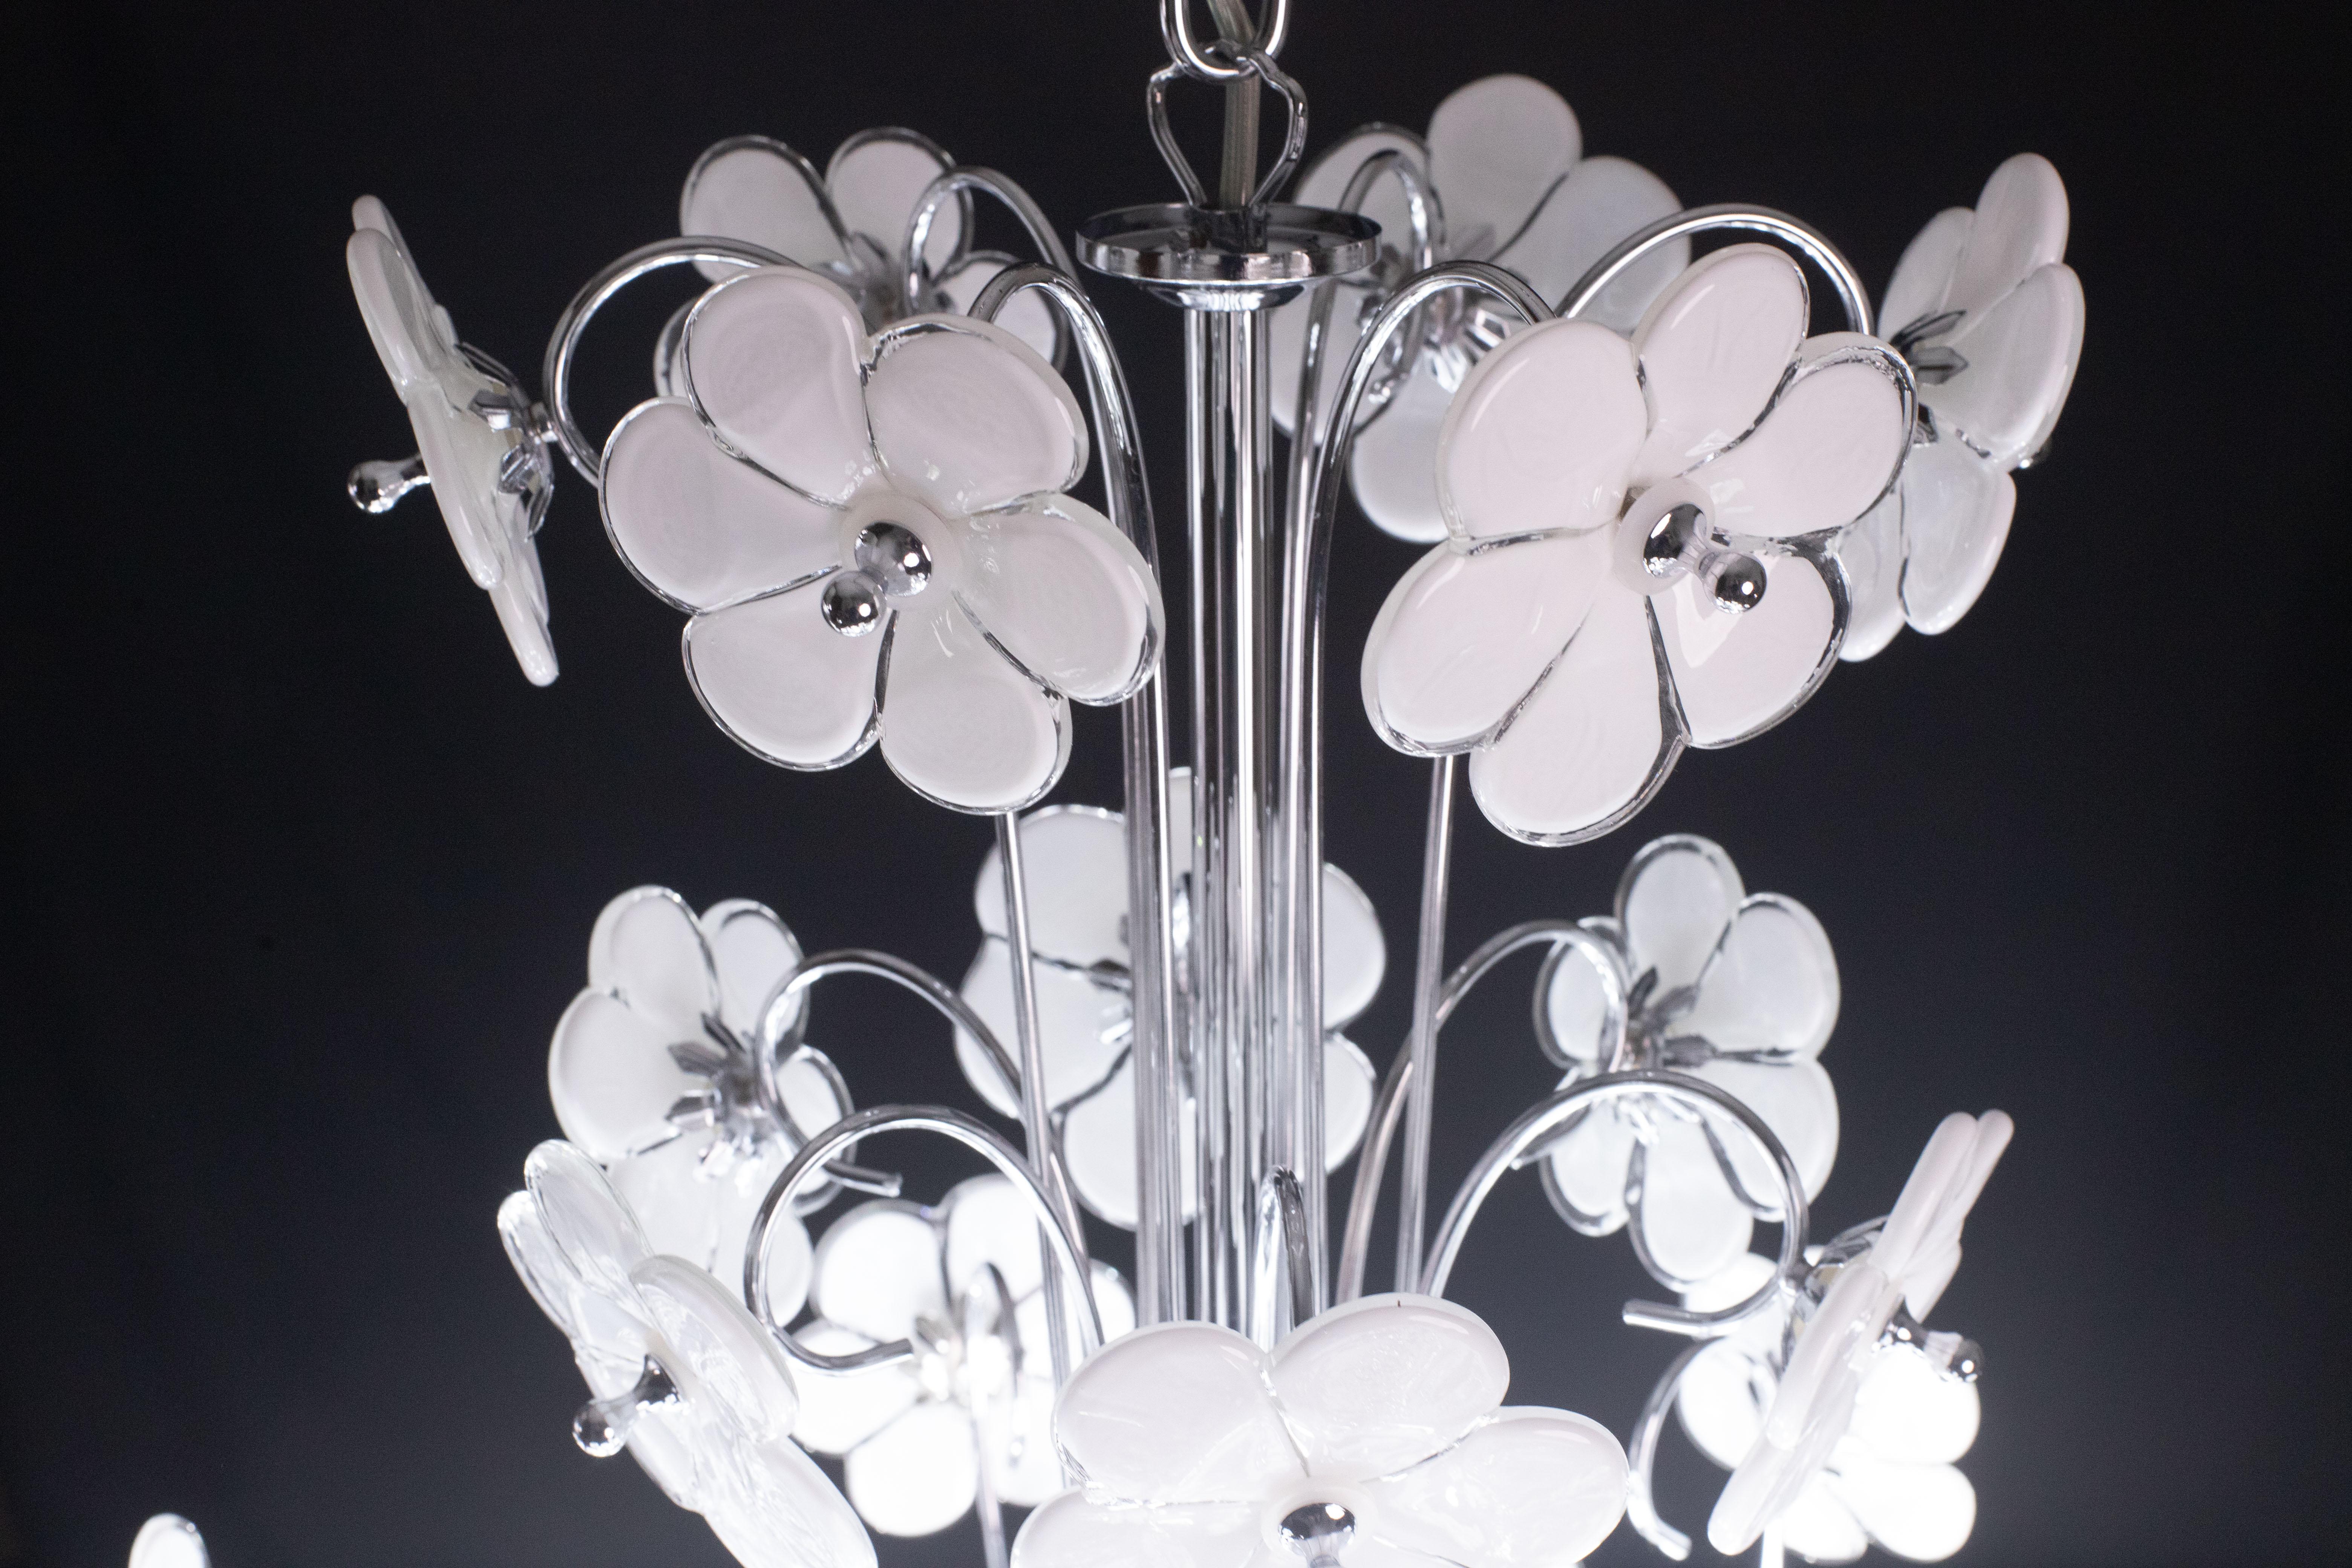 Spectacular Murano Chandelier Full of White Flowers, new bath silver, 1980s For Sale 2